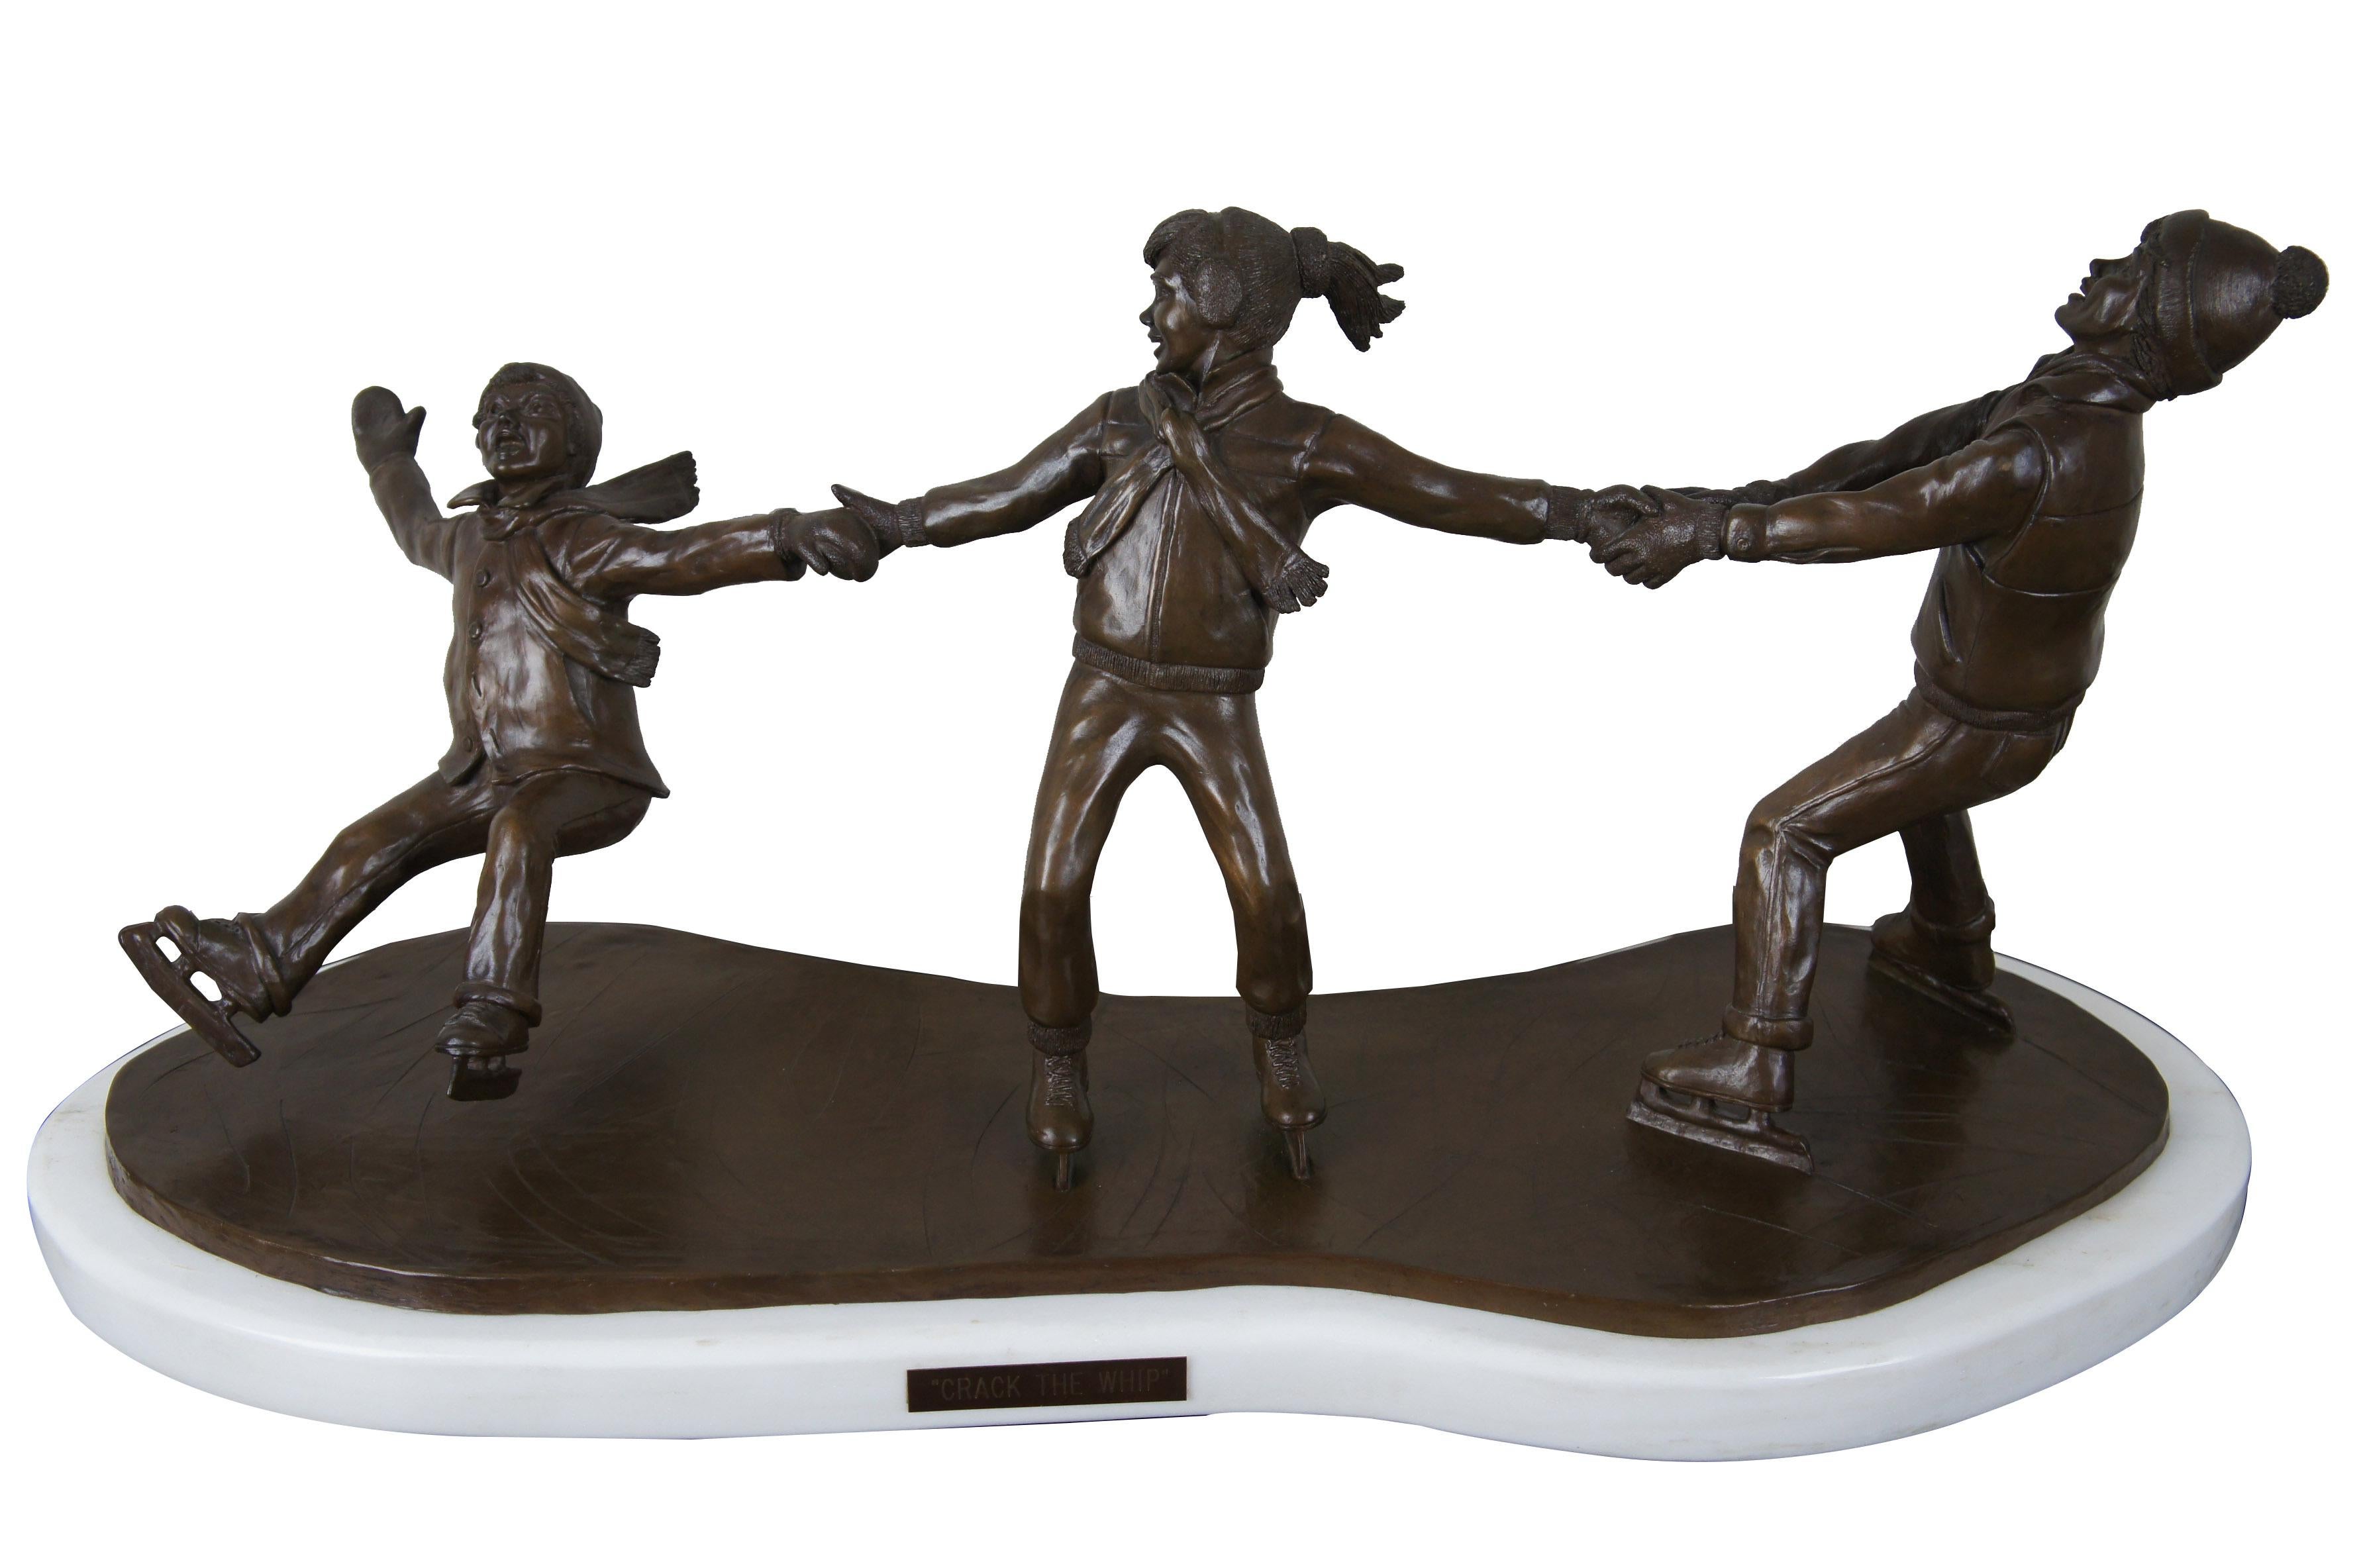 Crack the Whip by L. De Christopher 1986 bronze sculpture 3 ice skating children

A gorgeous bronze portraying a group of 3 children playing crack the whip on ice. 3/25 on marble base. 

Crack the Whip is a simple outdoor children's game that